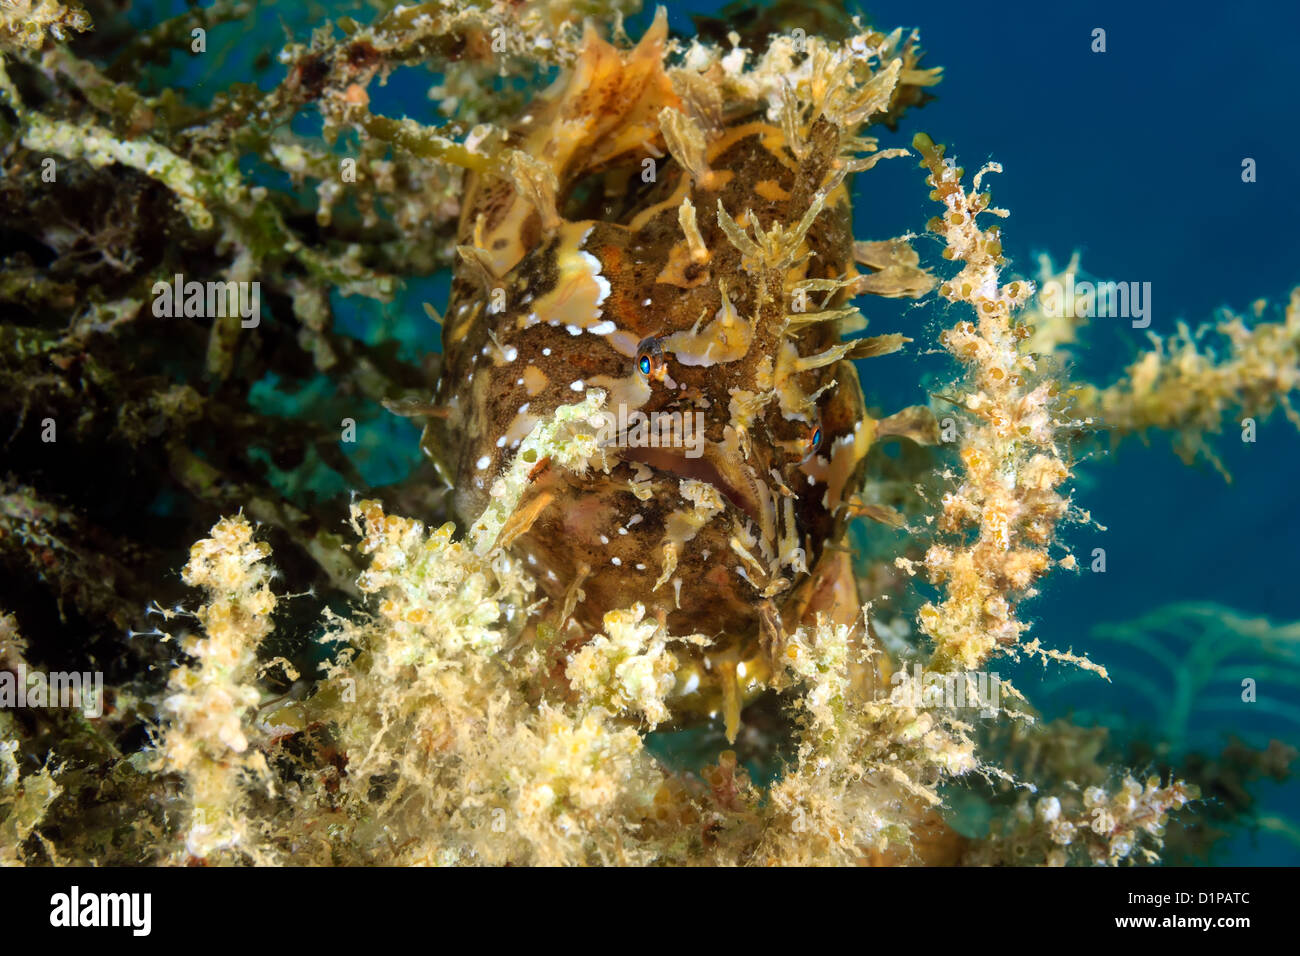 A Sargassum Frogfish hides on drifting seaweed in open ocean Stock Photo